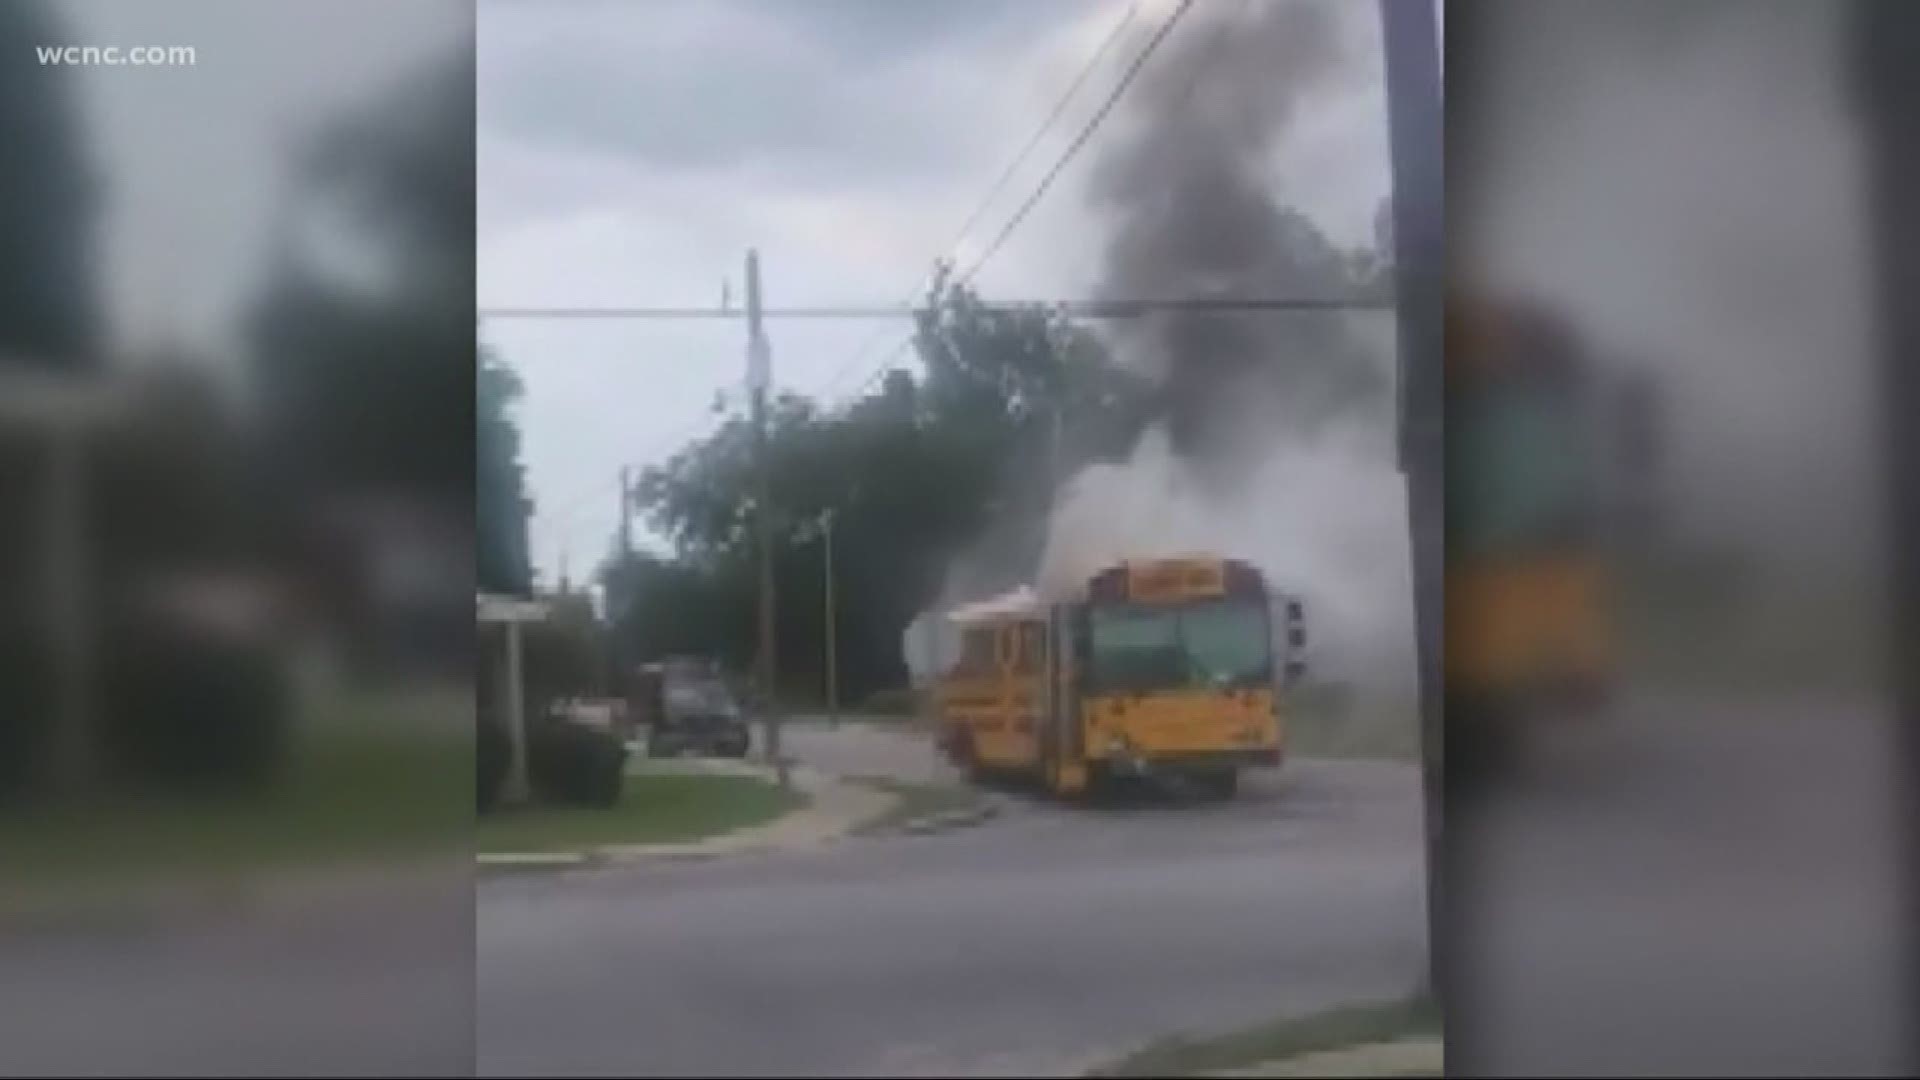 School bus fire in SC raises safety concerns as new year gets underway